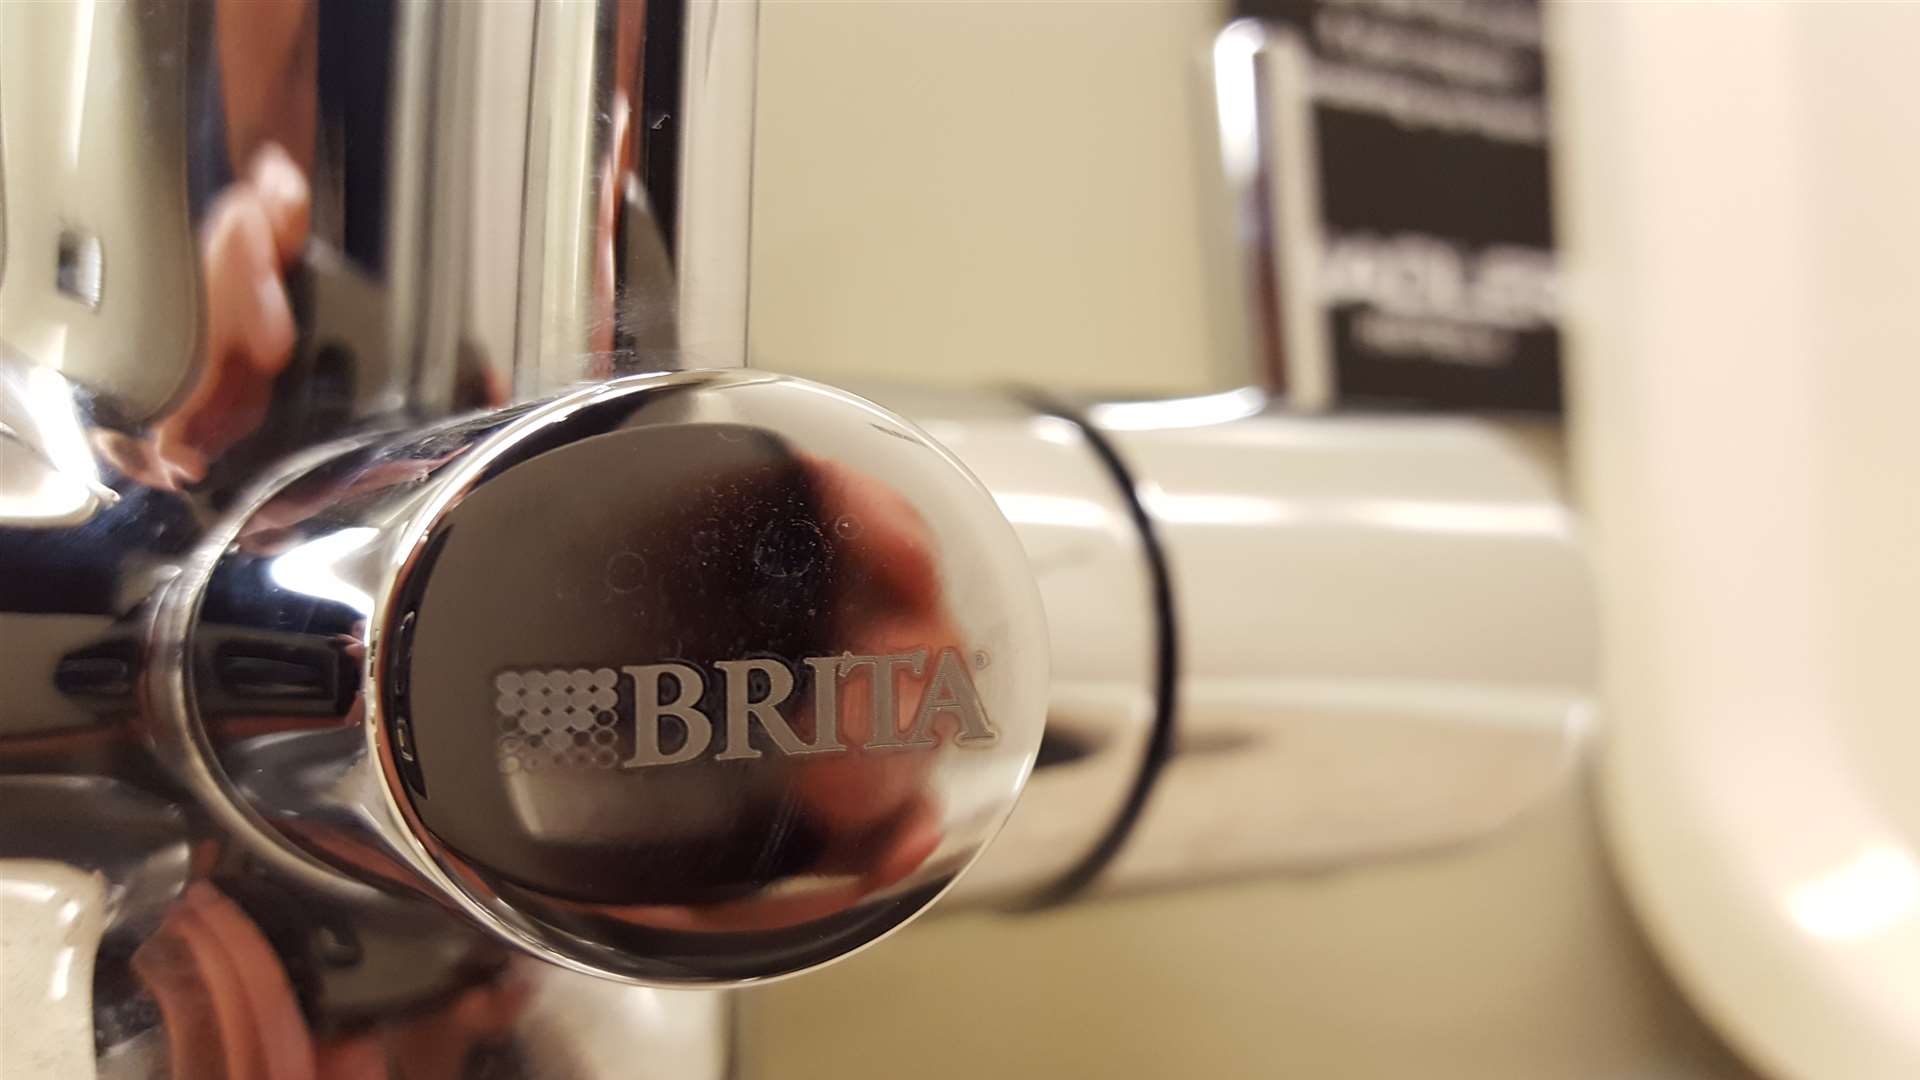 Brita filtered water is provided on tap in all rooms